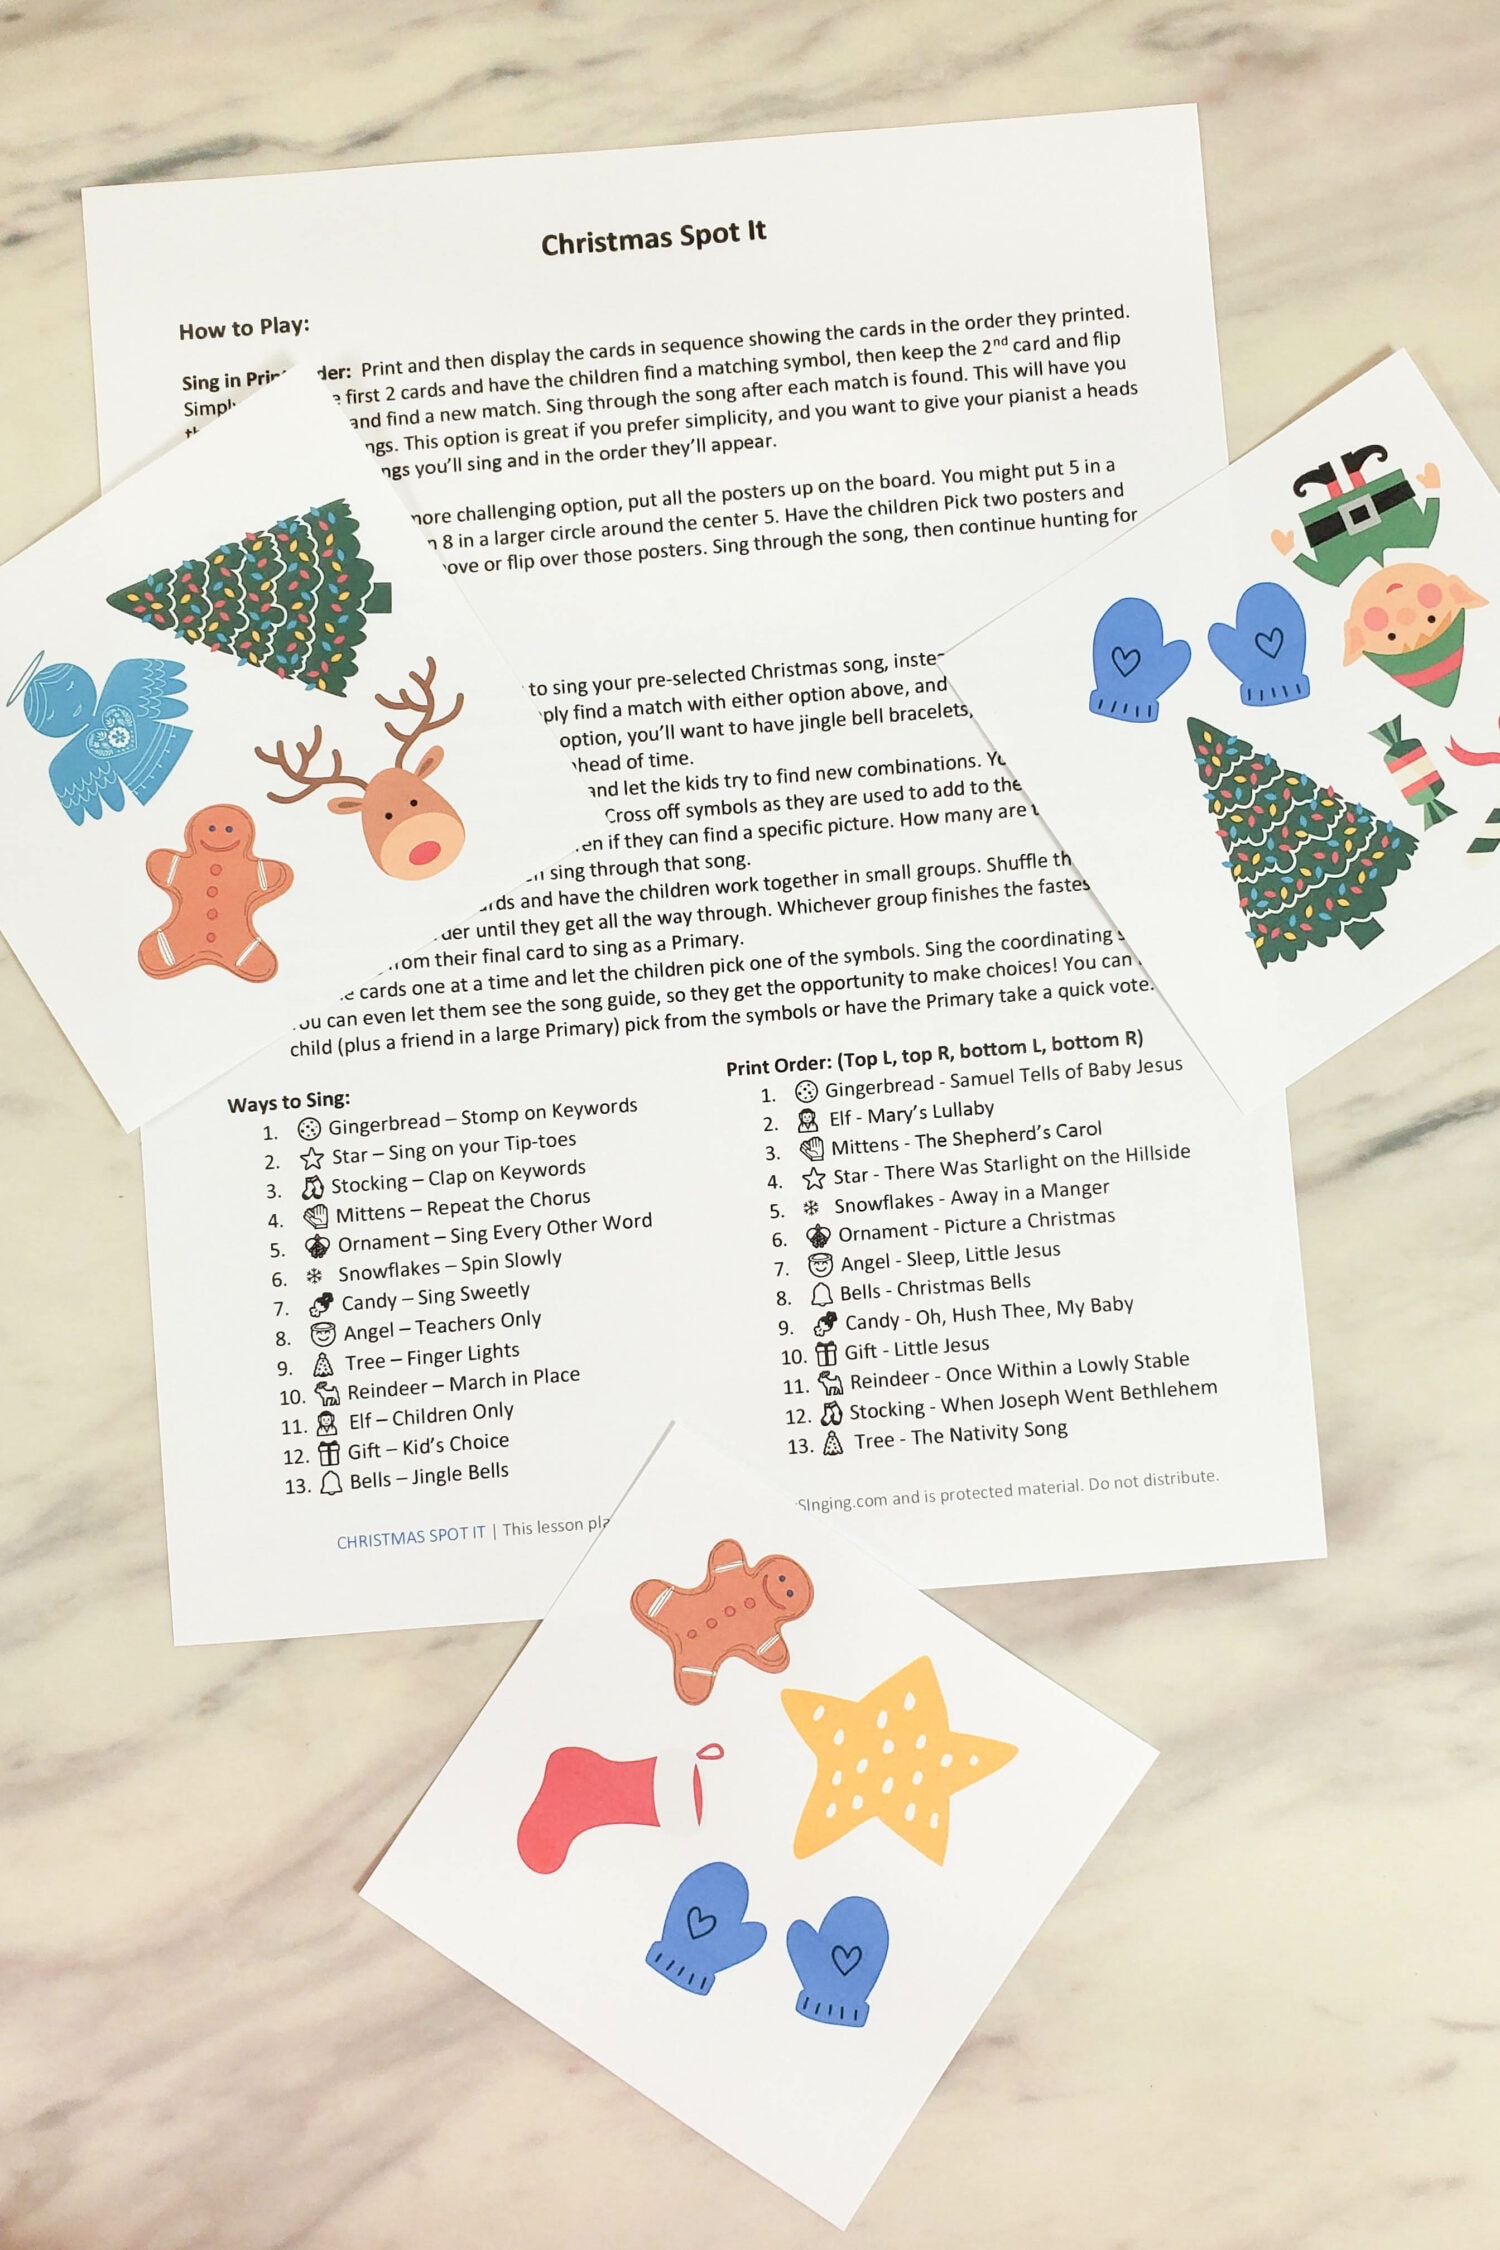 Try out this SO cute and fun printable Christmas Spot It game! Includes a free printable spot it game with a Christmas theme and 13 game cards. Print in 1/4 page or full page size with fun variations on ways to play. Plus ideas for using this activity for Singing Time for LDS Primary Music Leaders with Christmas Songs from the Children's Songbook or Christmas ways to sing.